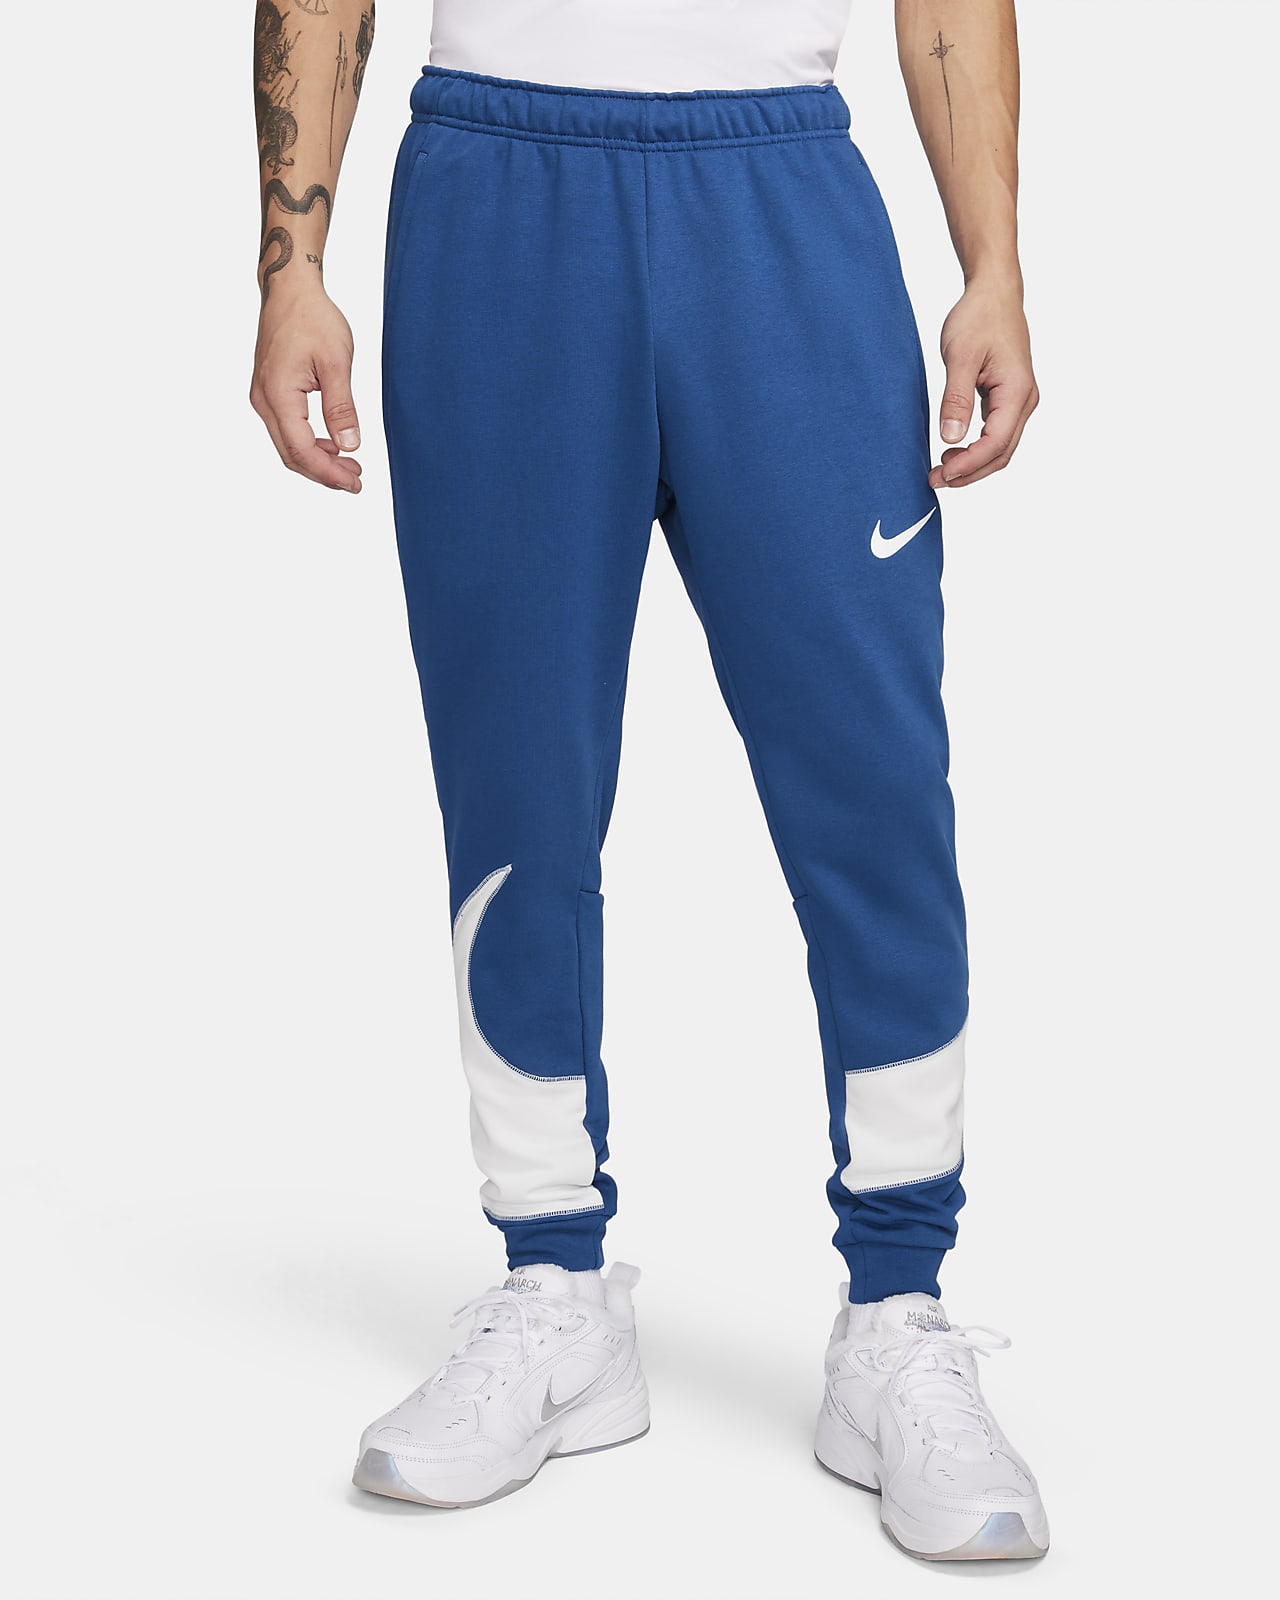 Men's DRI-FIT Trousers Black And Blue, Casual/Active wear Outclass Sports  Jogging pants/Trouser/Sweats Causal Fashion Wear.